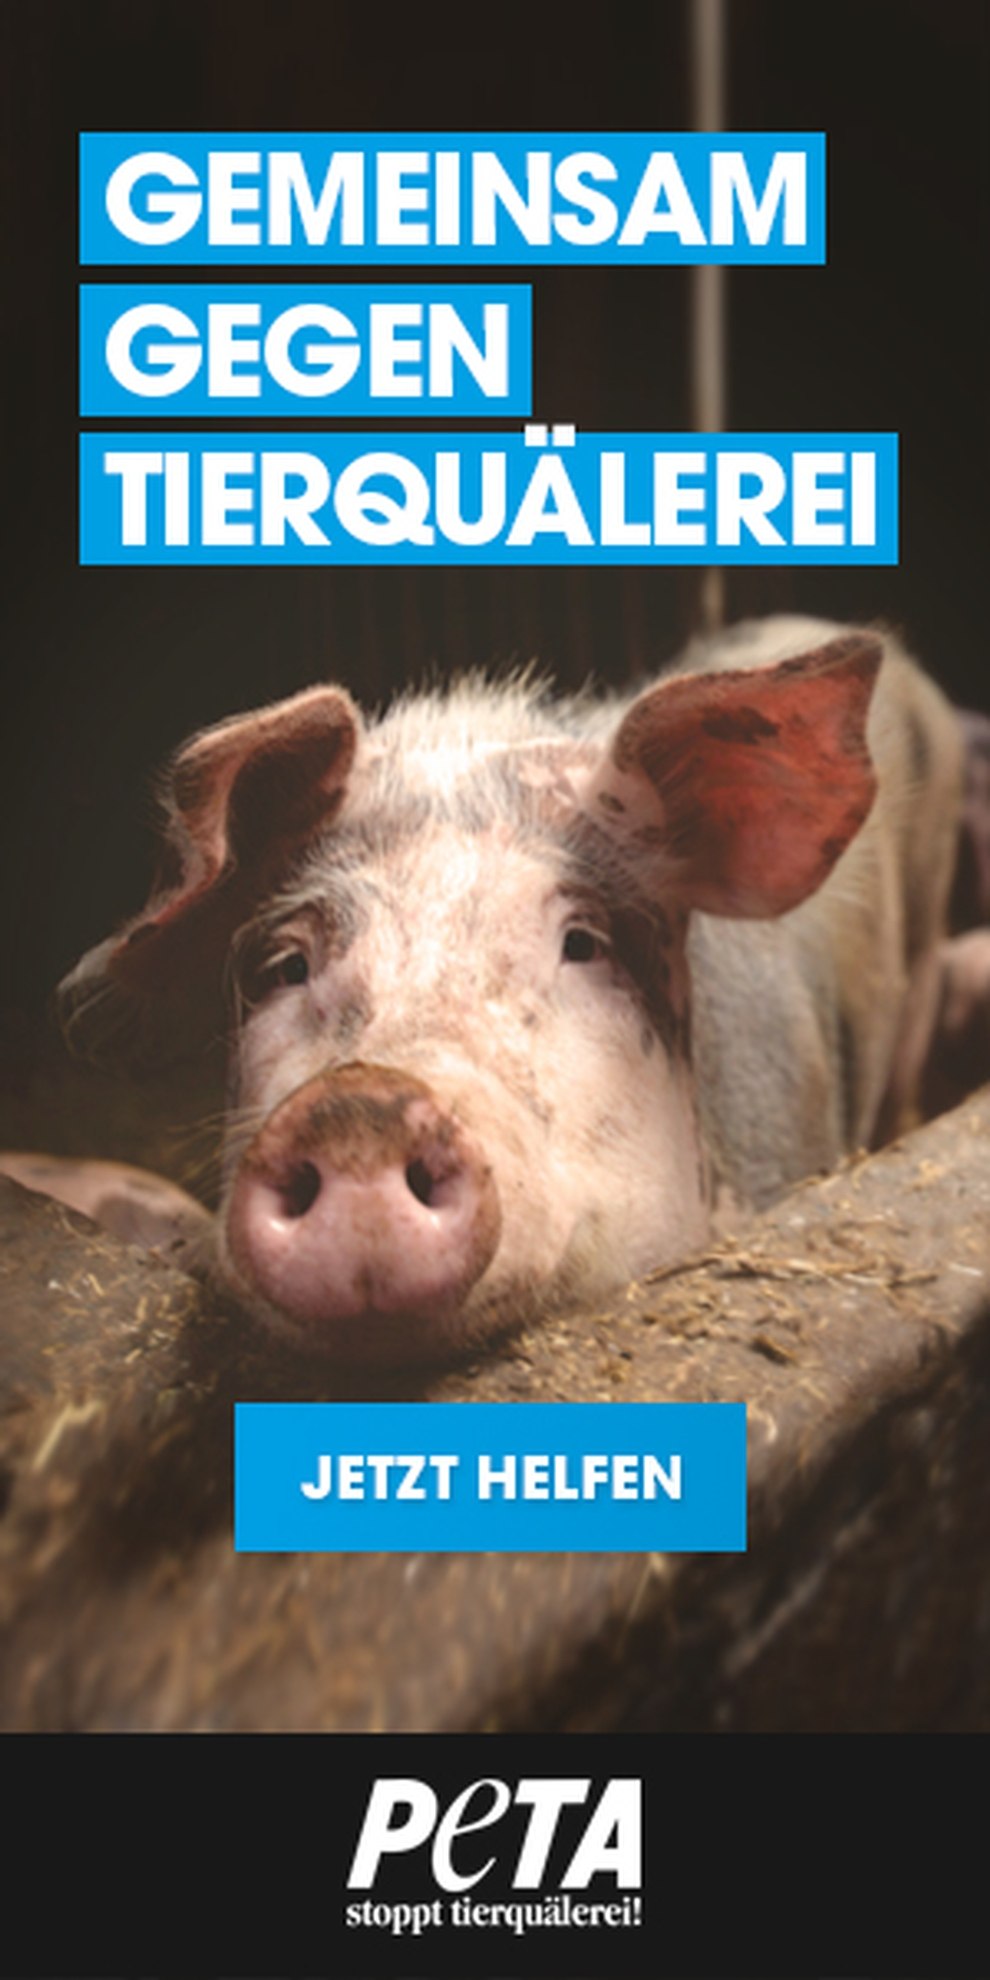 PETA Germany - Together against animal cruelty